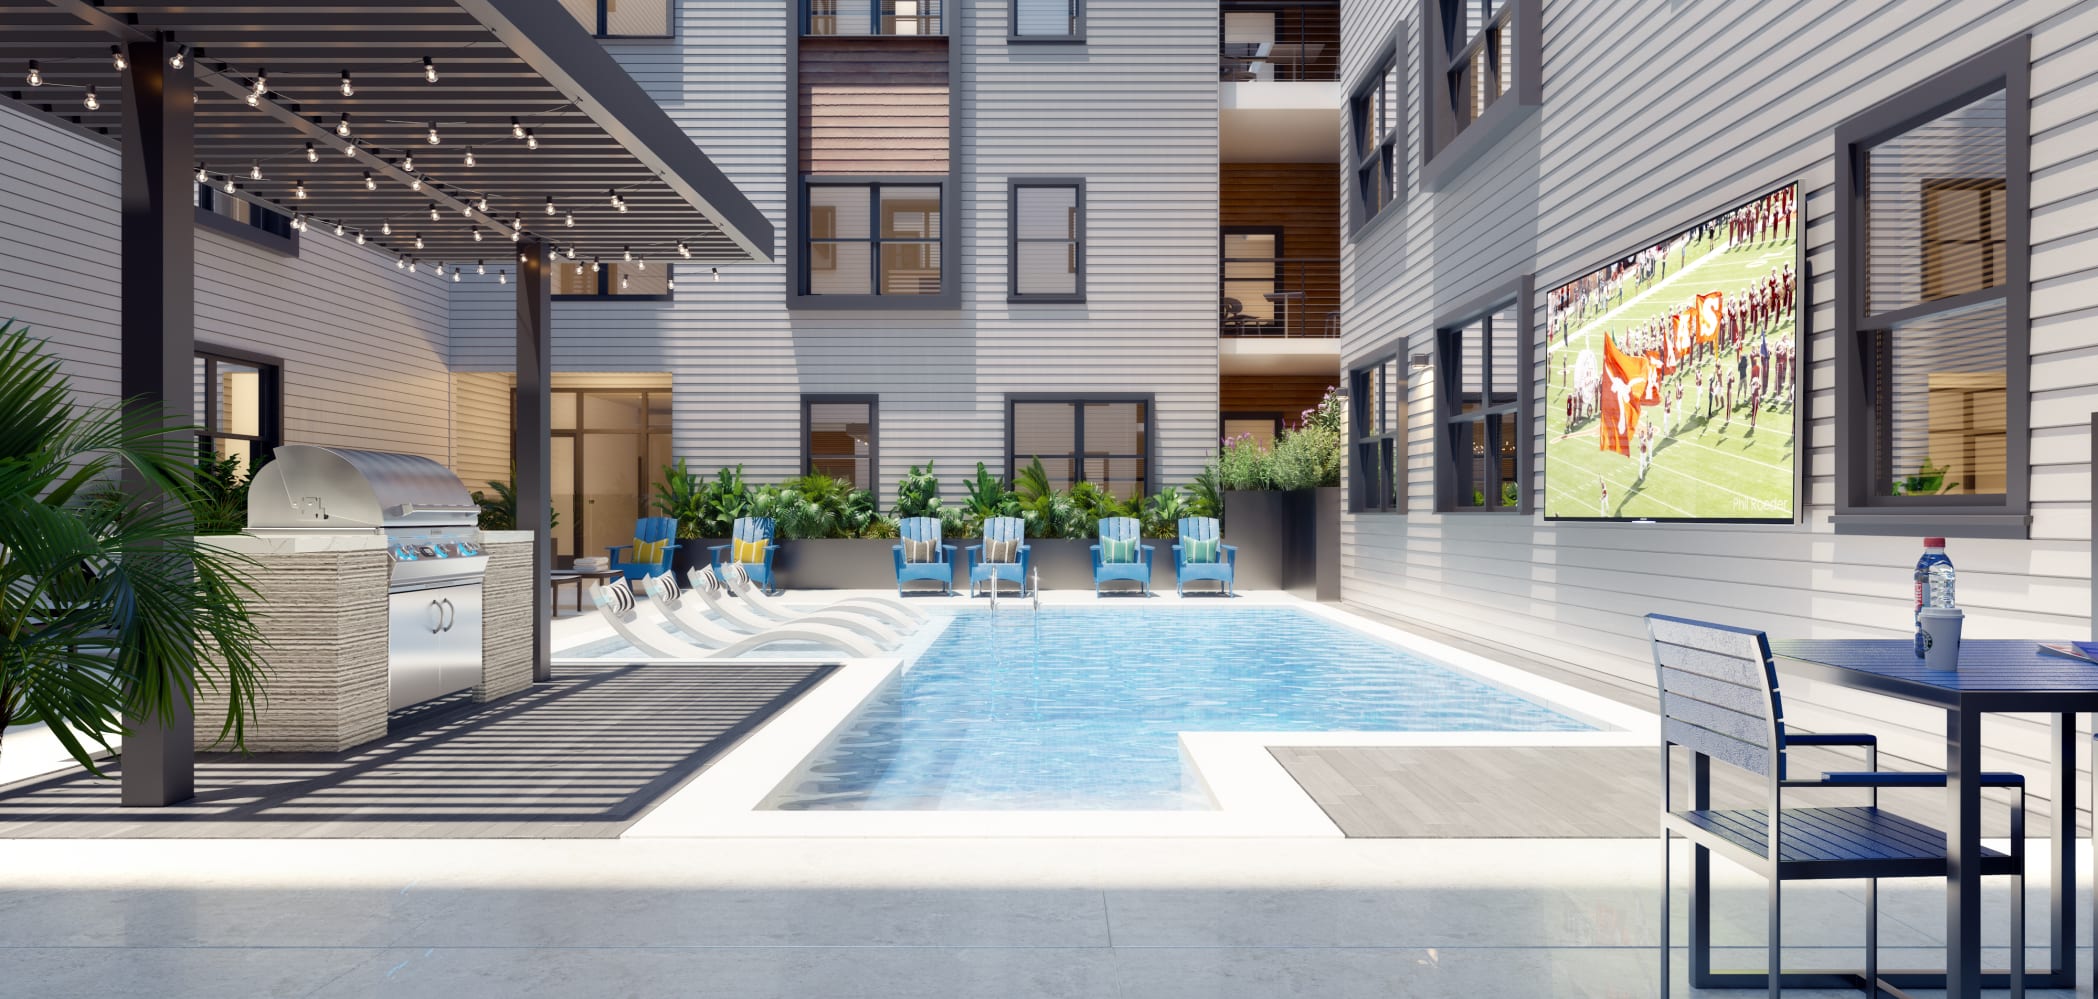 Noble 2500 Apartment Pool Deck in West Campus